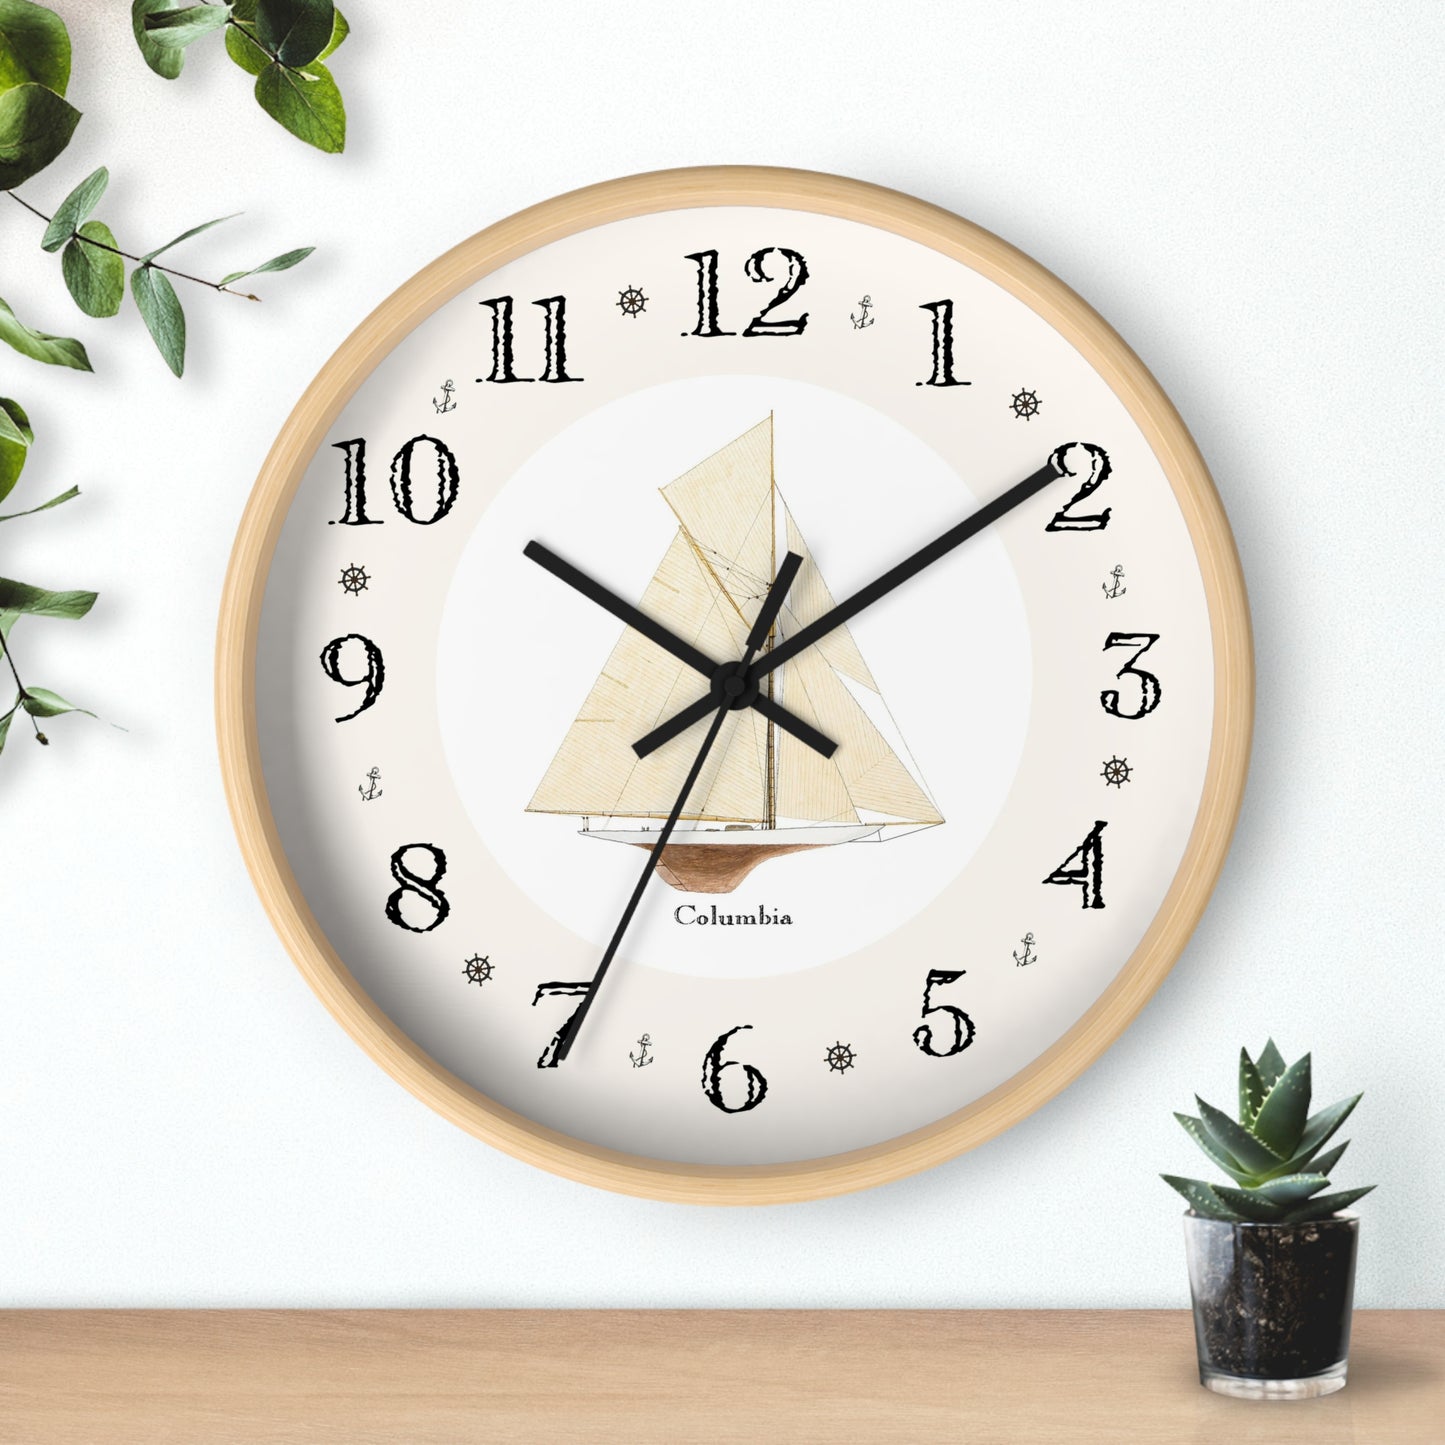 The Columbia Designer Clock features hand-drawn naval symbols between the numbers on the clock face. Hang this wall clock in any room for a unique decorator touch.